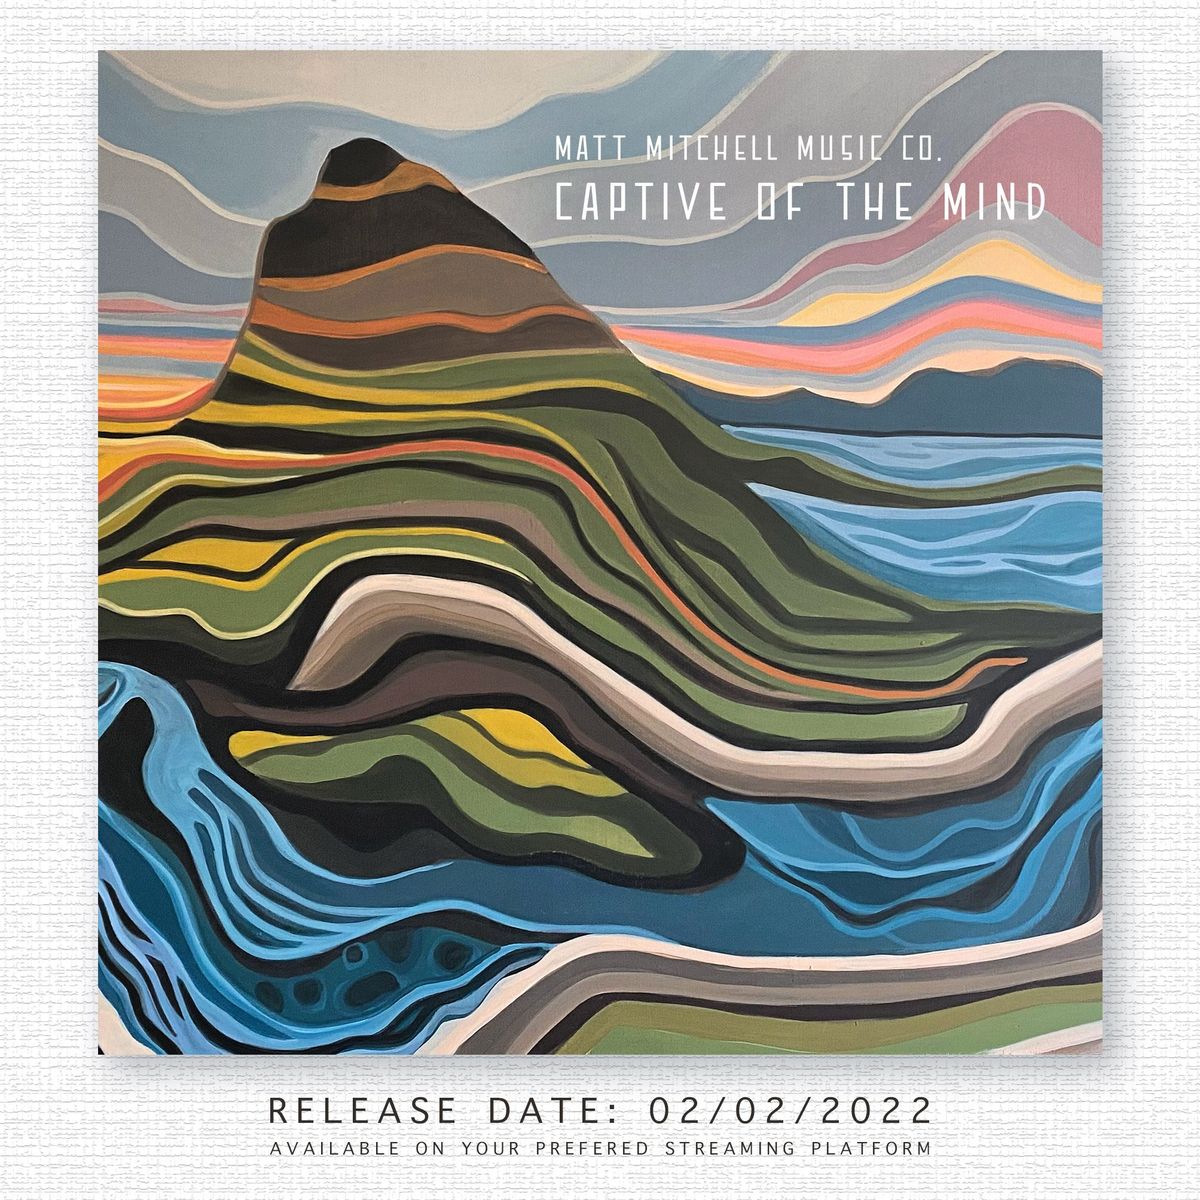 The new album by Matt Mitchell Music Co. is titled “Captive of the Mind.”  (Jennifer Leigh Borst)